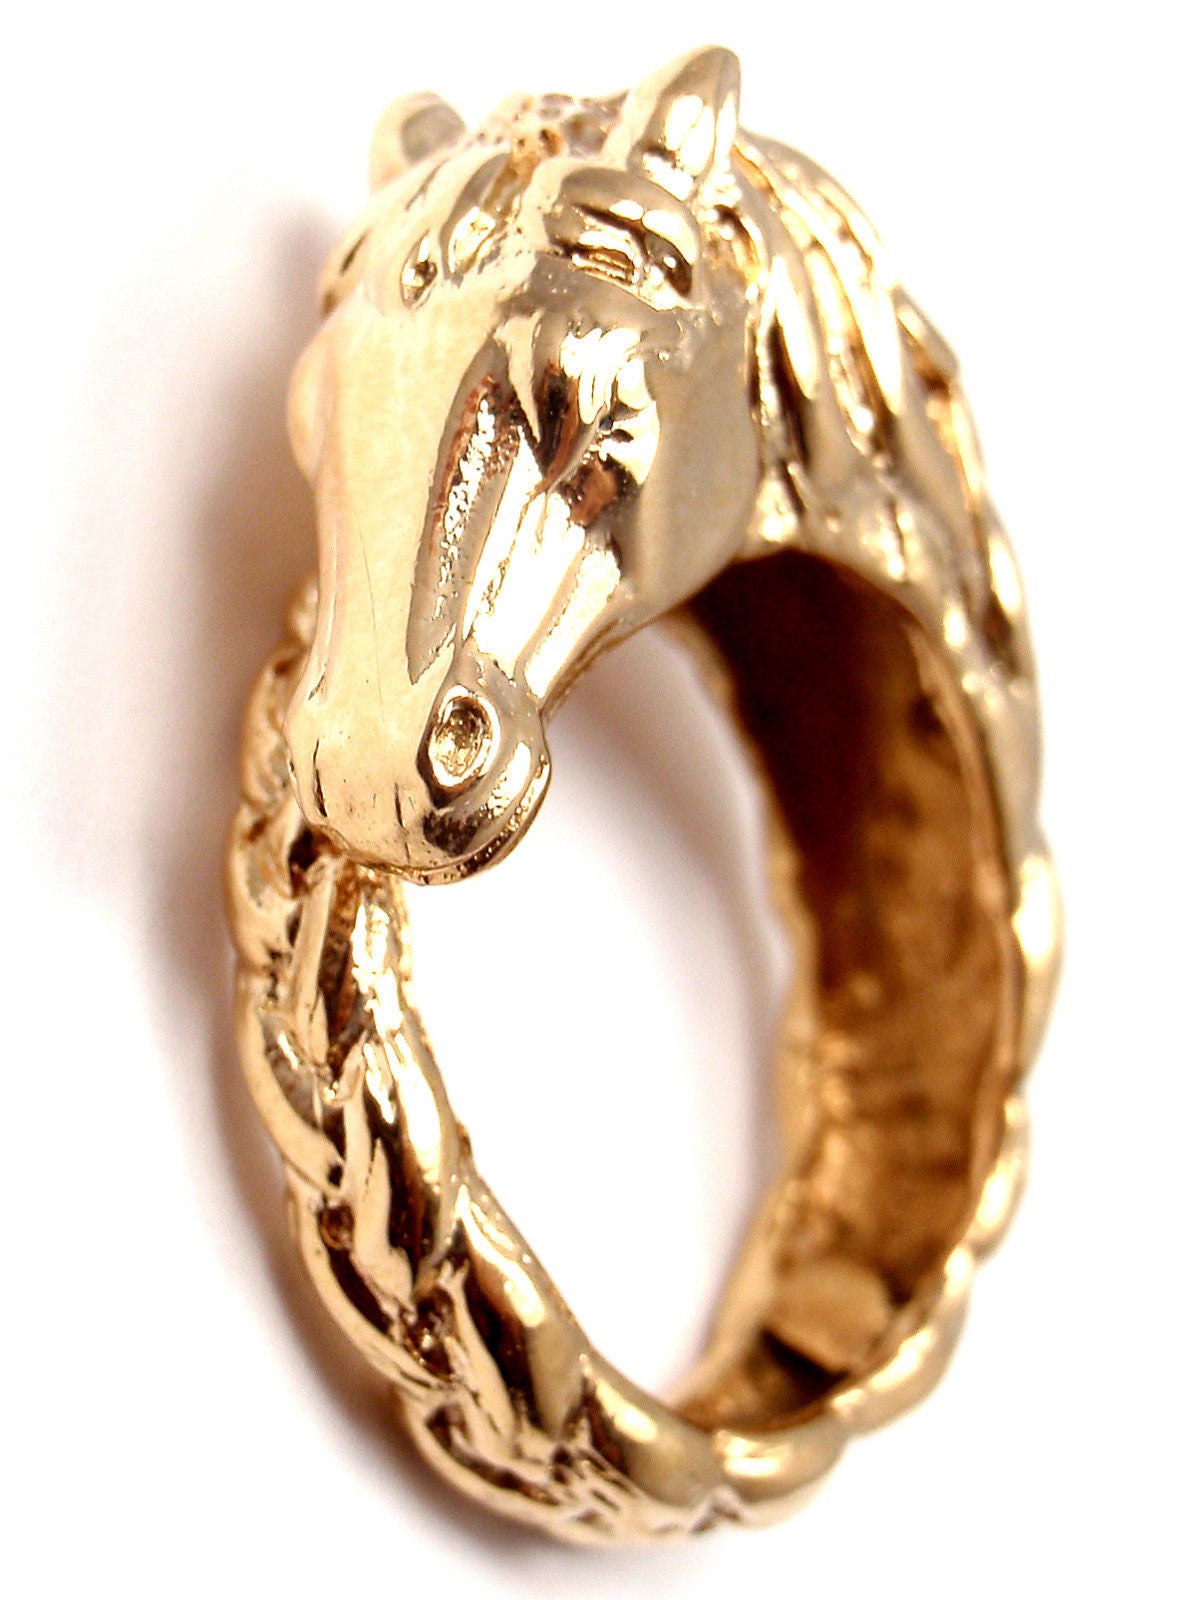 18k Yellow Gold Horse Band Ring by Hermes.

Details:
Ring Size: 5.5
Weight: 14.1 grams
Width: 12mm t
Stamped Hallmarks:  Hermès Paris French Hallmarks
*Free Shipping within the United States*

Your Price: $5,700

0567mmld